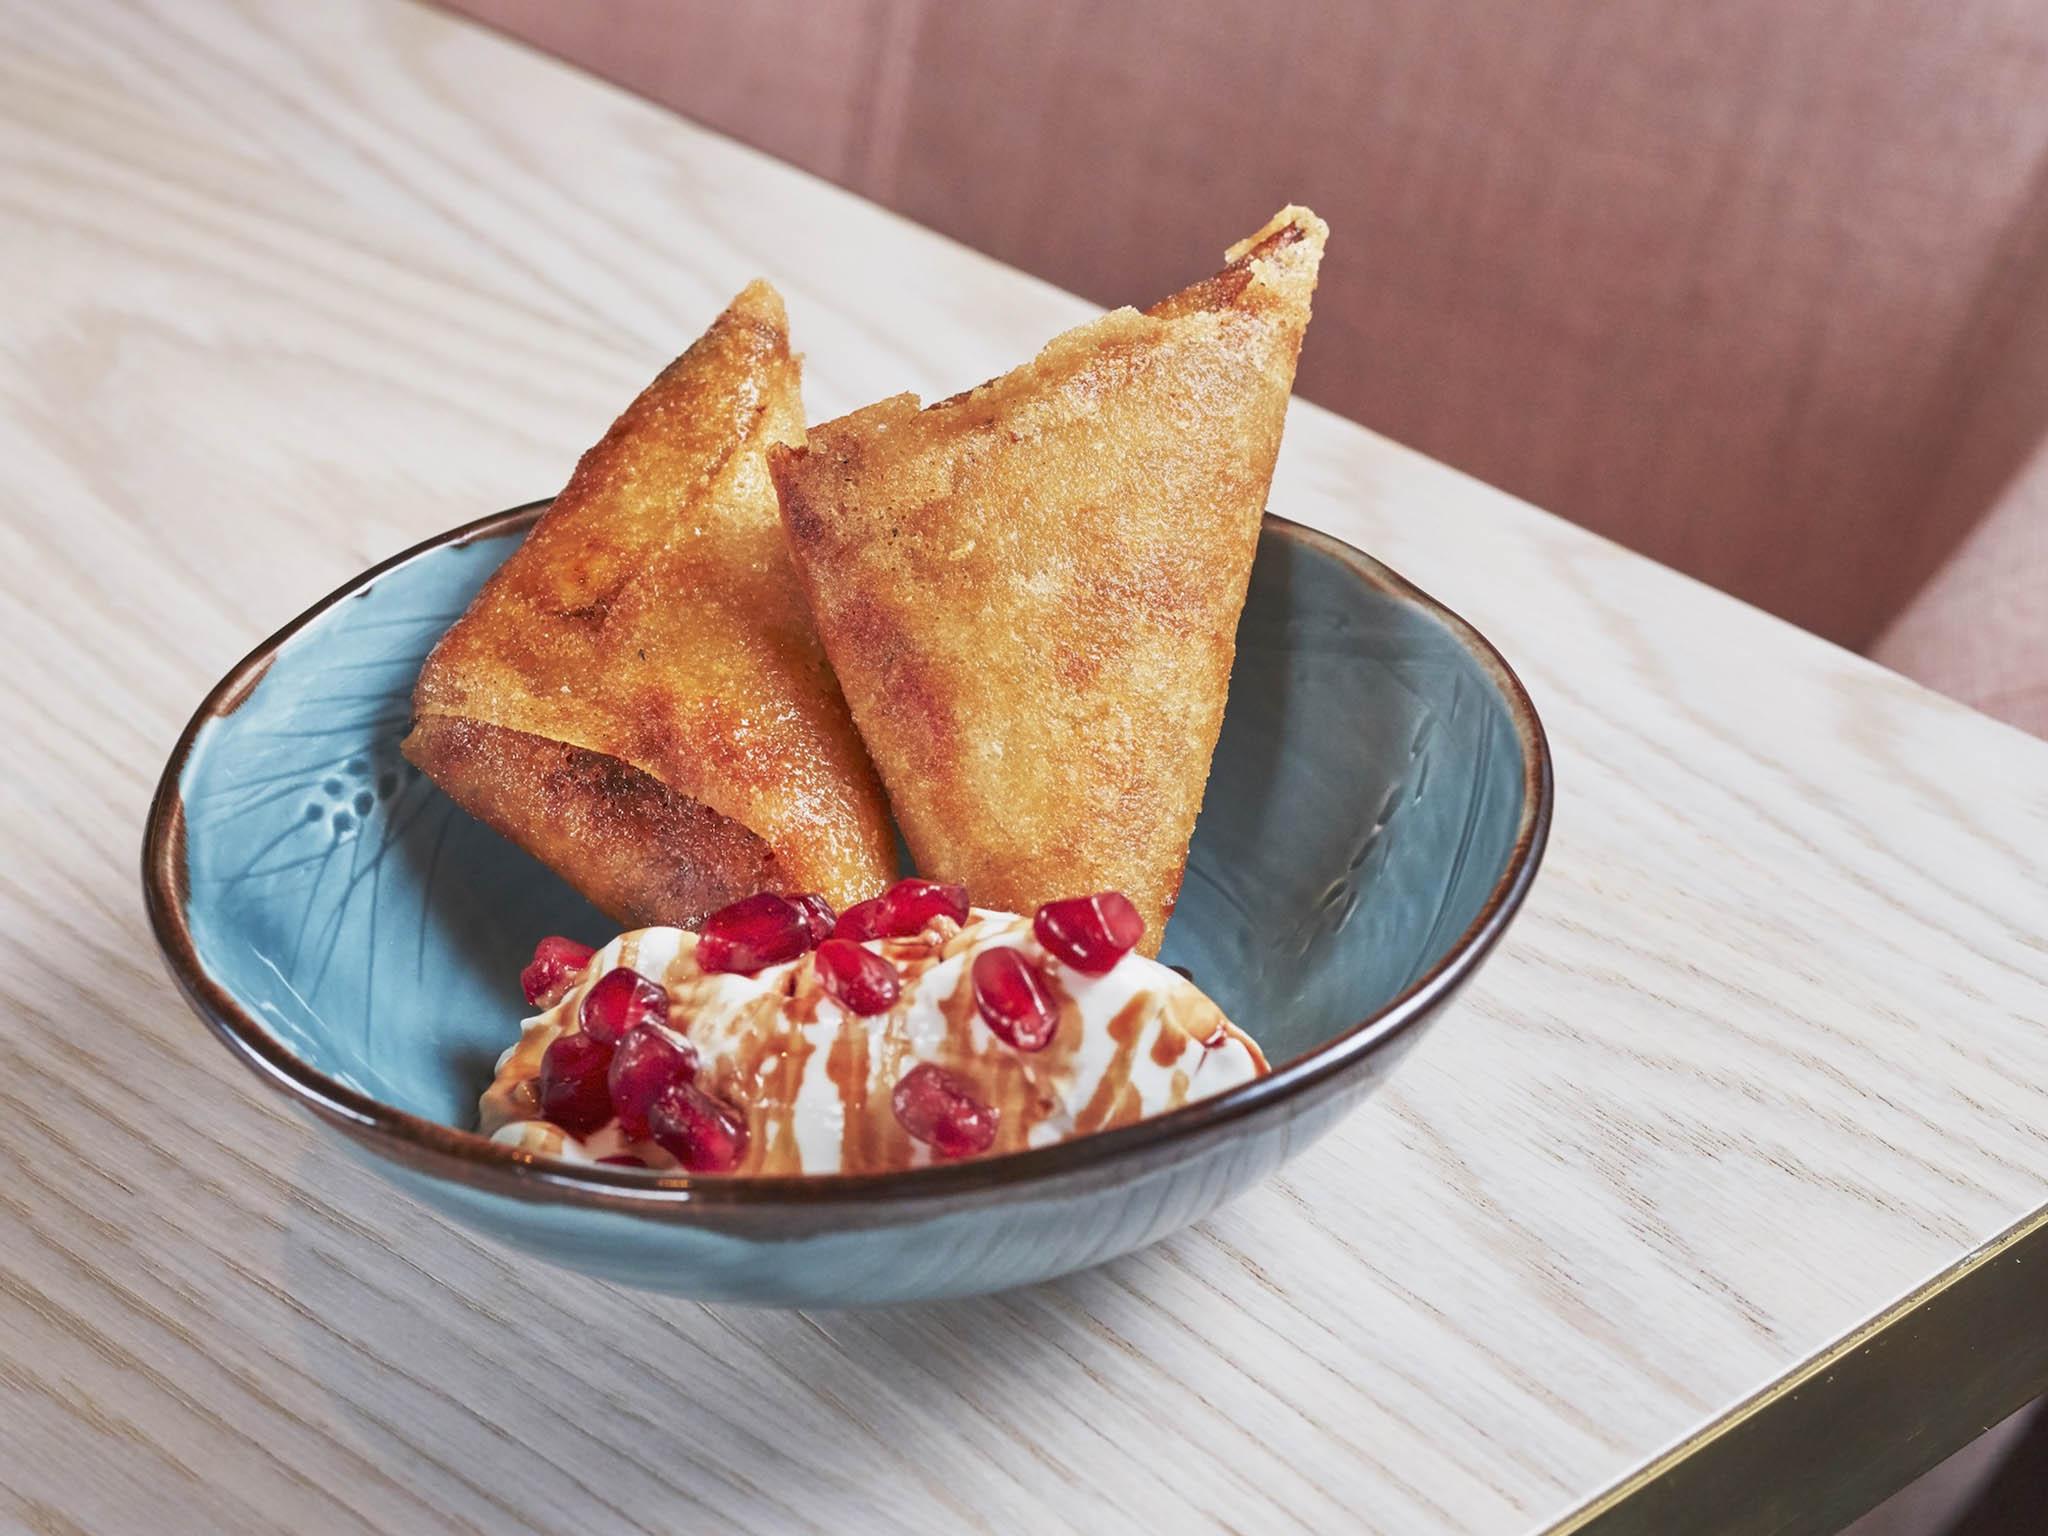 The chicken samosa with feta and butternut squash from the small plates menu